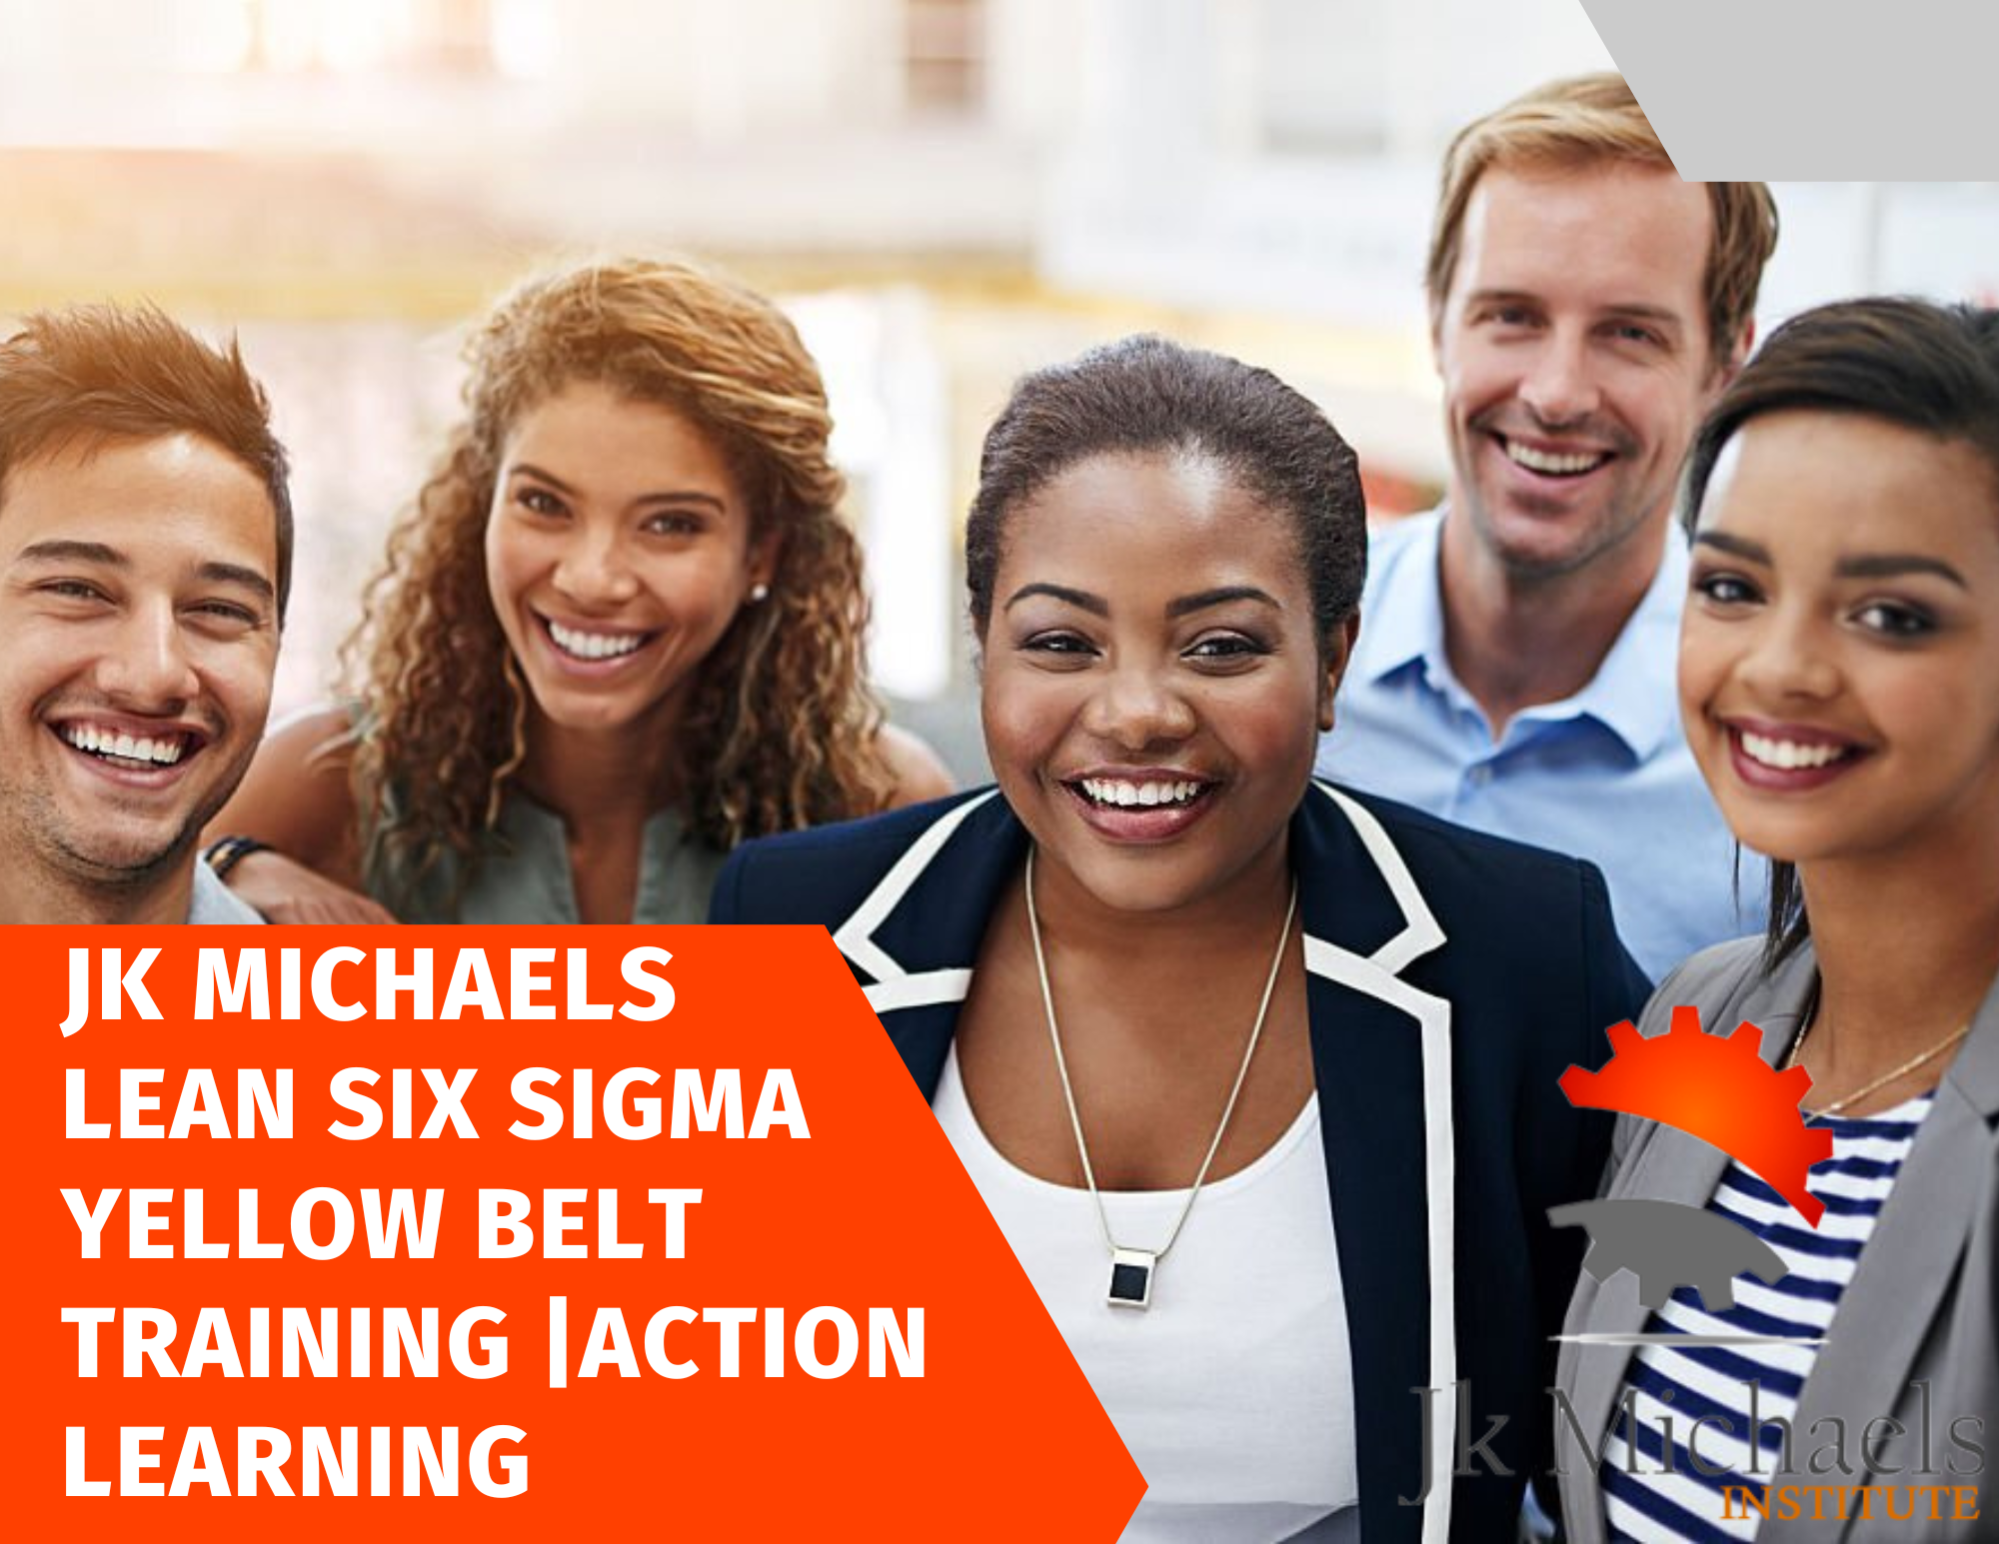 LEAN-SIX-SIGMA-YELLOW-BELT-TRAINING-ACTION-LEARNING